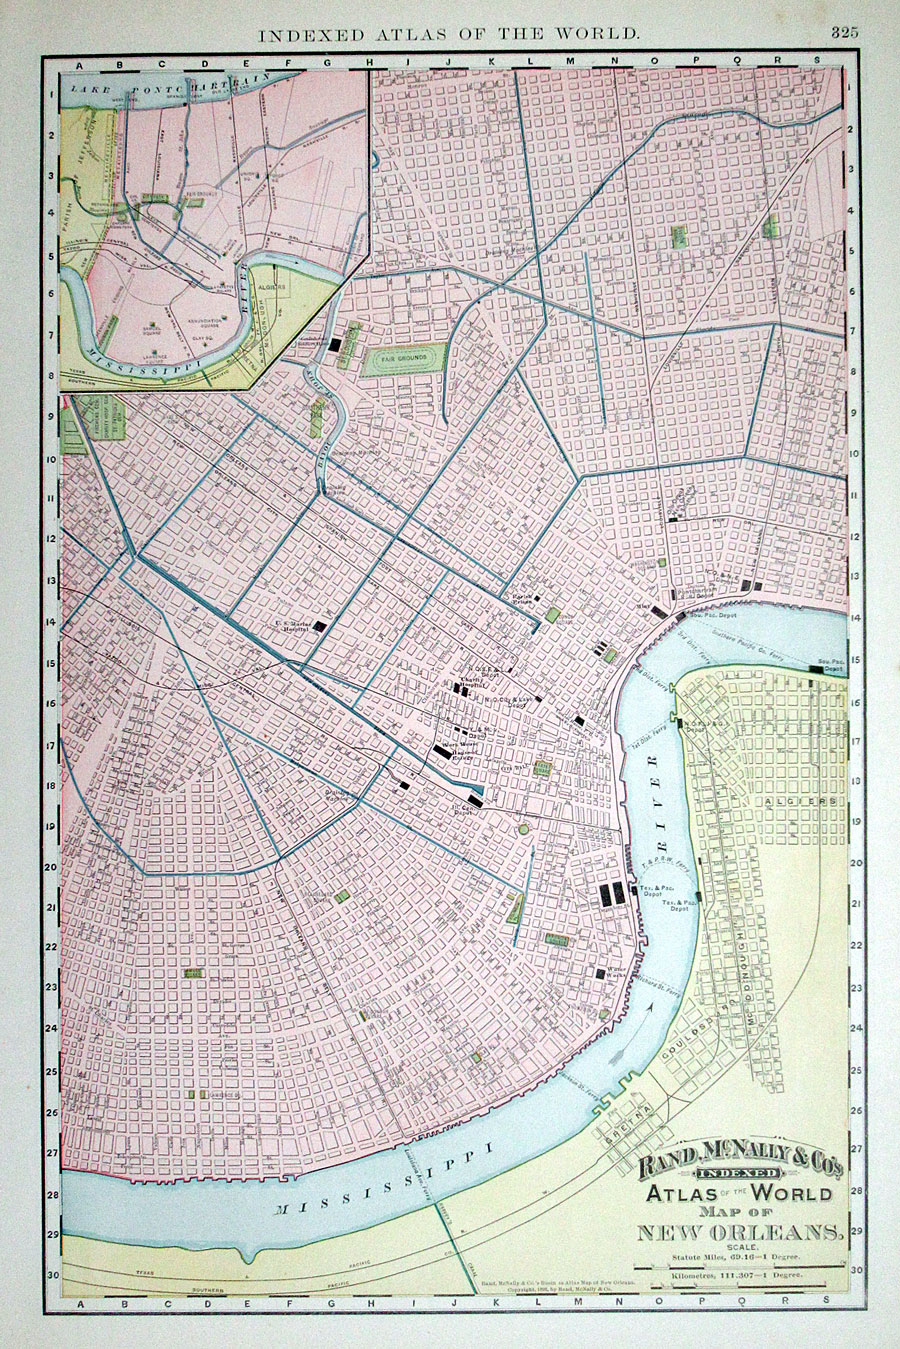 c 1892 Rand, McNally & Co. Map of New Orleans